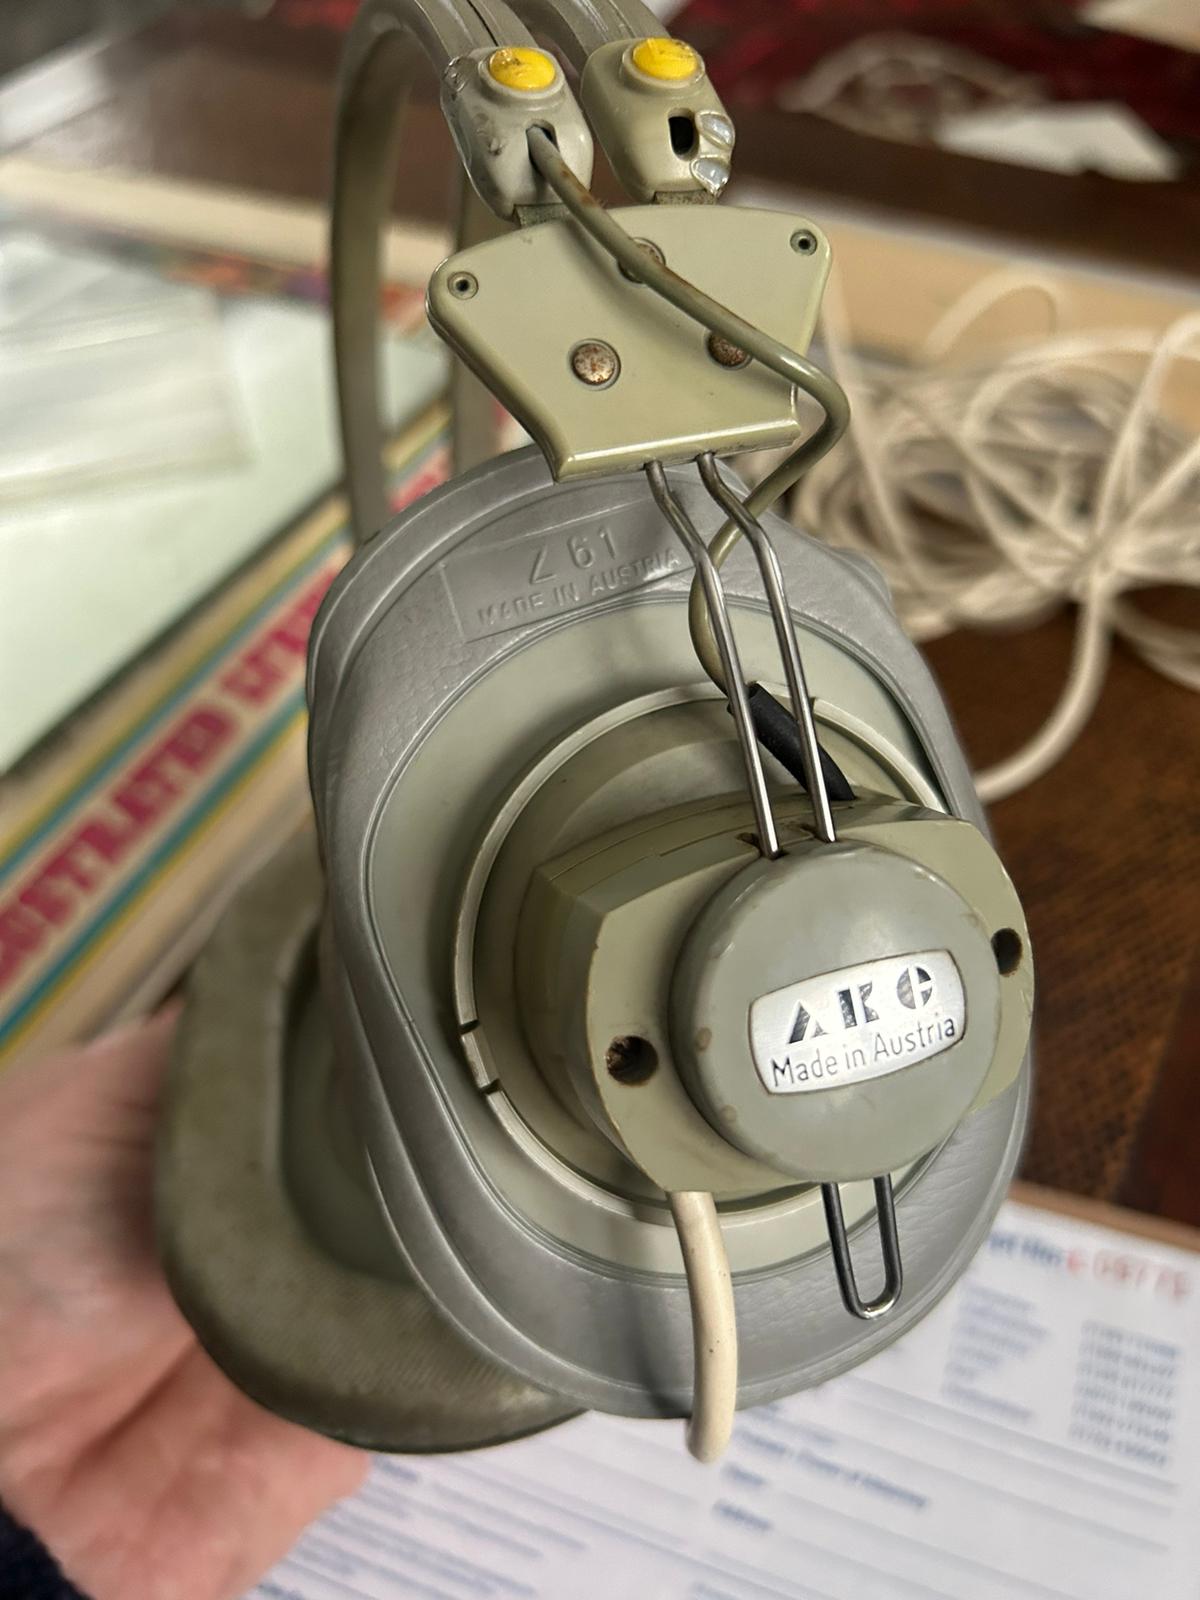 Beatles' headphones could make Fab Four figure - Antique Collecting